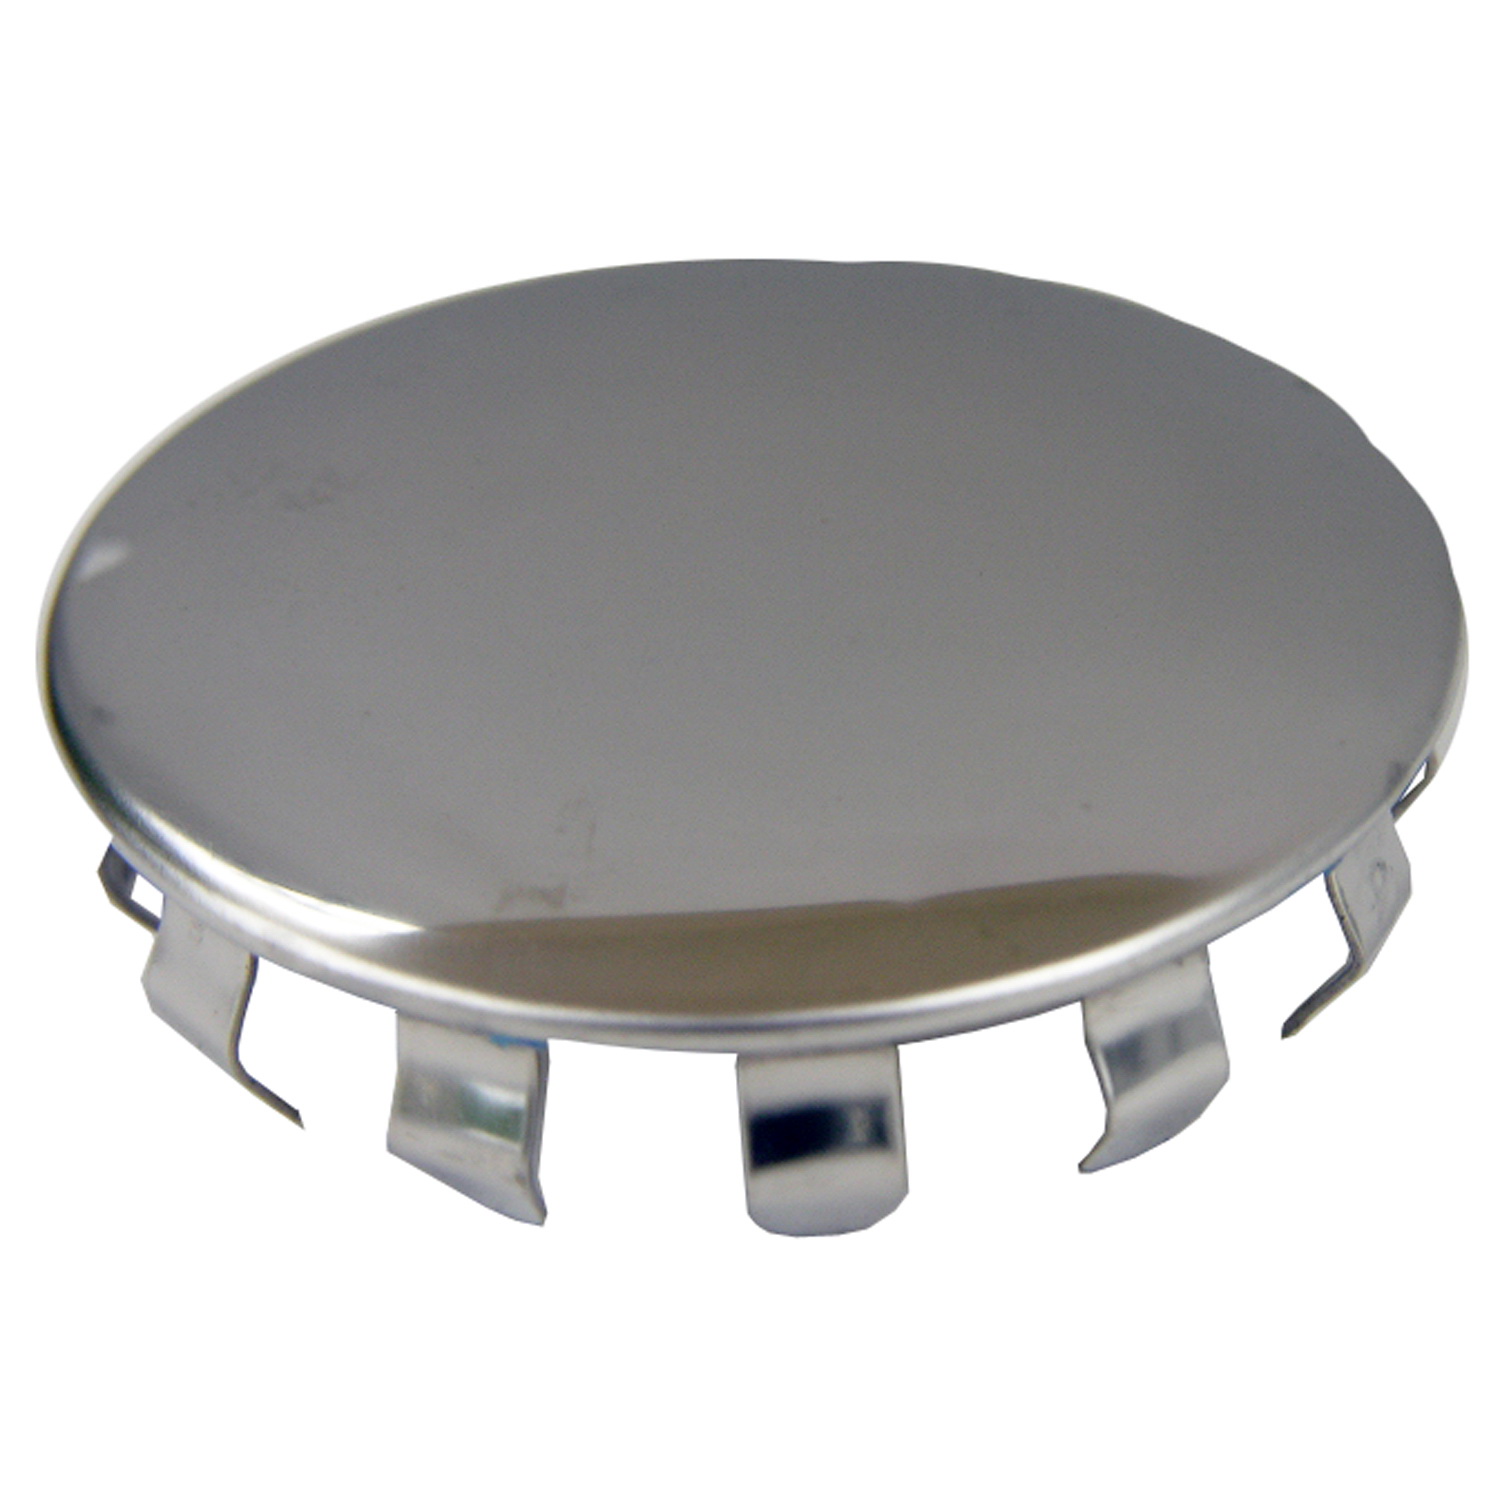 LASCO 03-1453 Faucet Hole Cover, 1-1/2 in ID x 1-5/8 in OD Dia, Stainless Steel - 1